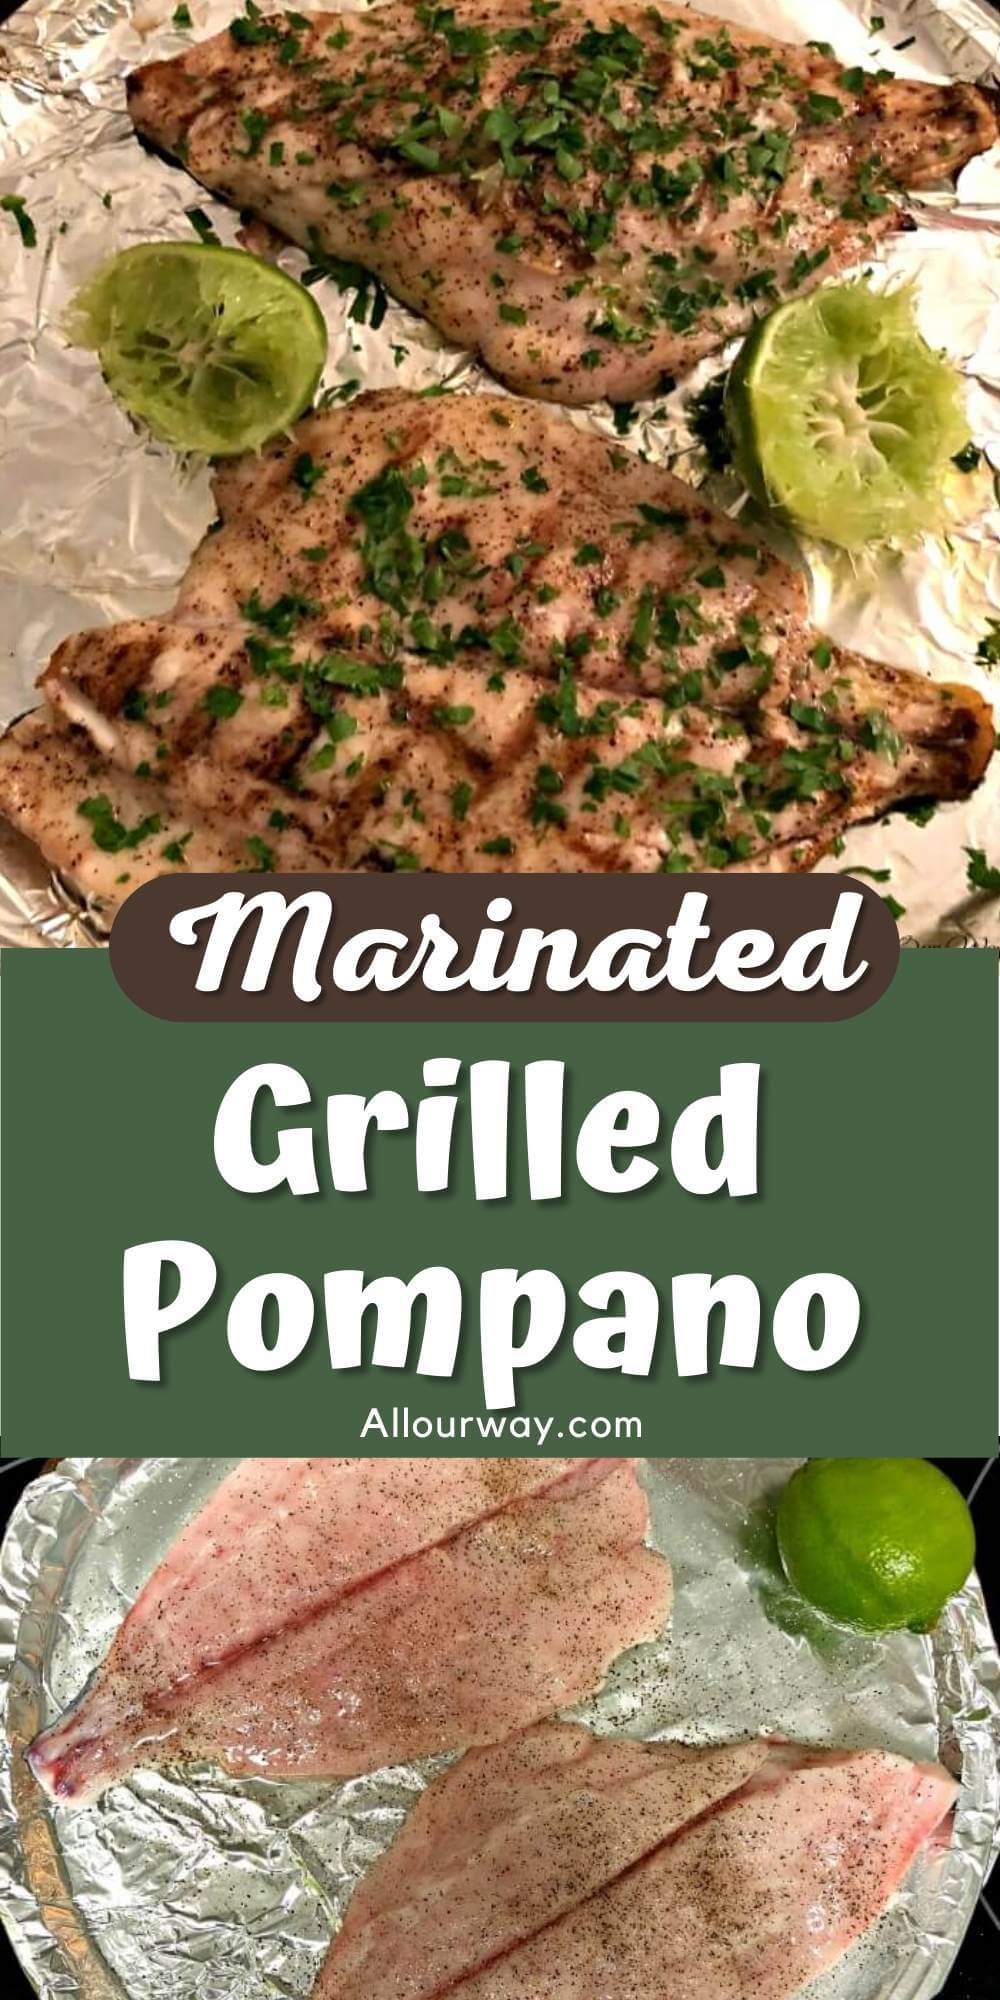 The Florida pompano is a mild fish that’s rich in taste with firm, white meat that almost melts in your mouth. All you need to bring out its subtle flavor is a squeeze of lime juice, some olive oil, and a sprinkle of salt and pepper. The ideal way to cook the golden pompano is to grill it with the skin on. #pompano, #Floridapompano, #howtocookpompano, #grilledpompano, #limegrilledpompano, #grilledfish,